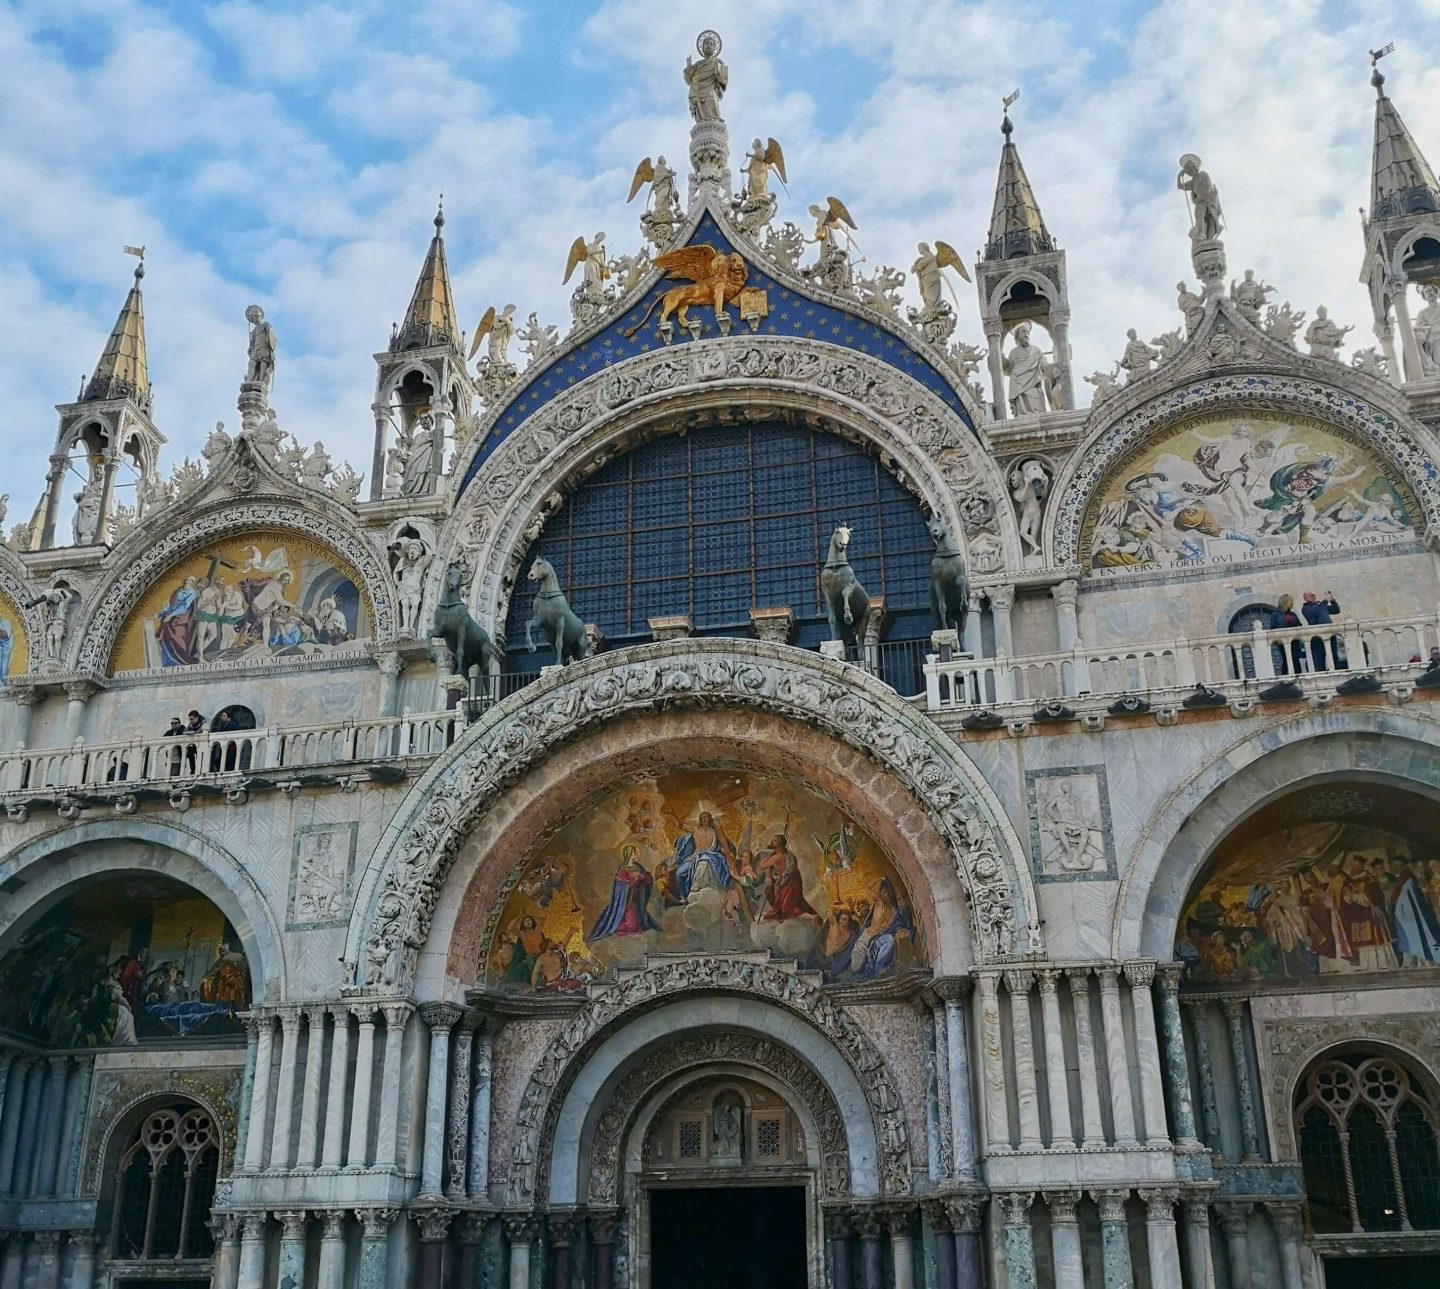 New Shades of Hippy - Anneka Nicholls - travel blog and green living - 24 hours in Venice, Italy - Saint Mark's Basilica, Venice